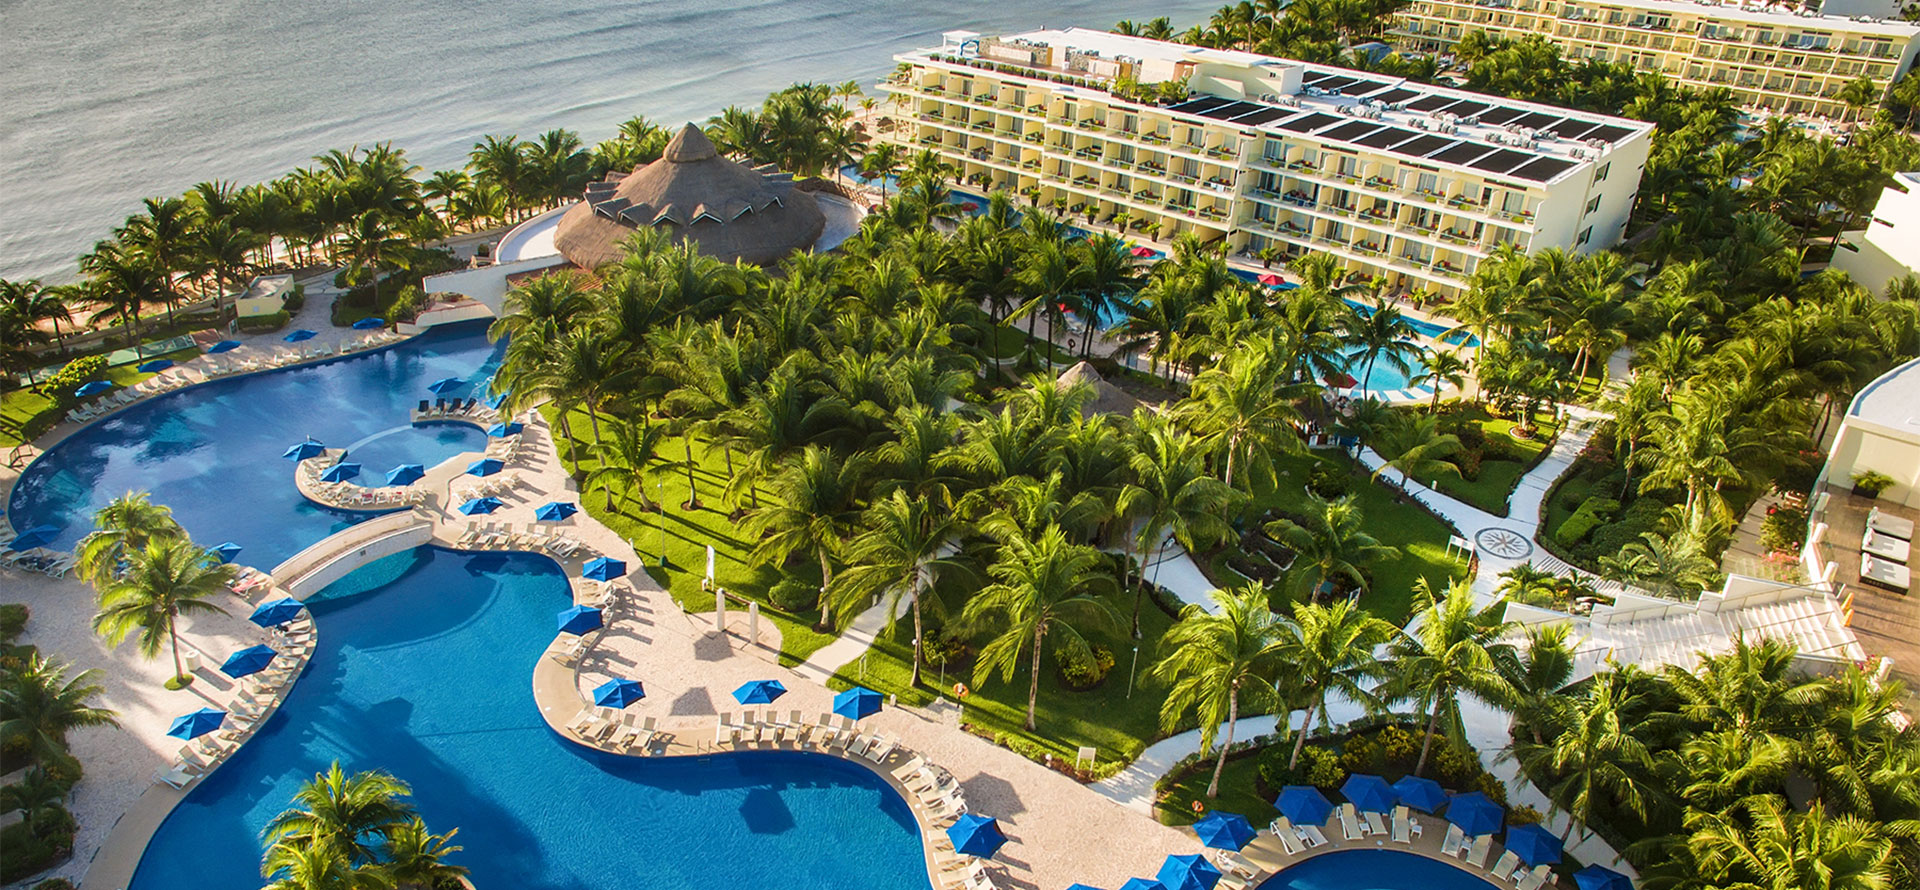 Cancun all-inclusive adults only resort and palms.